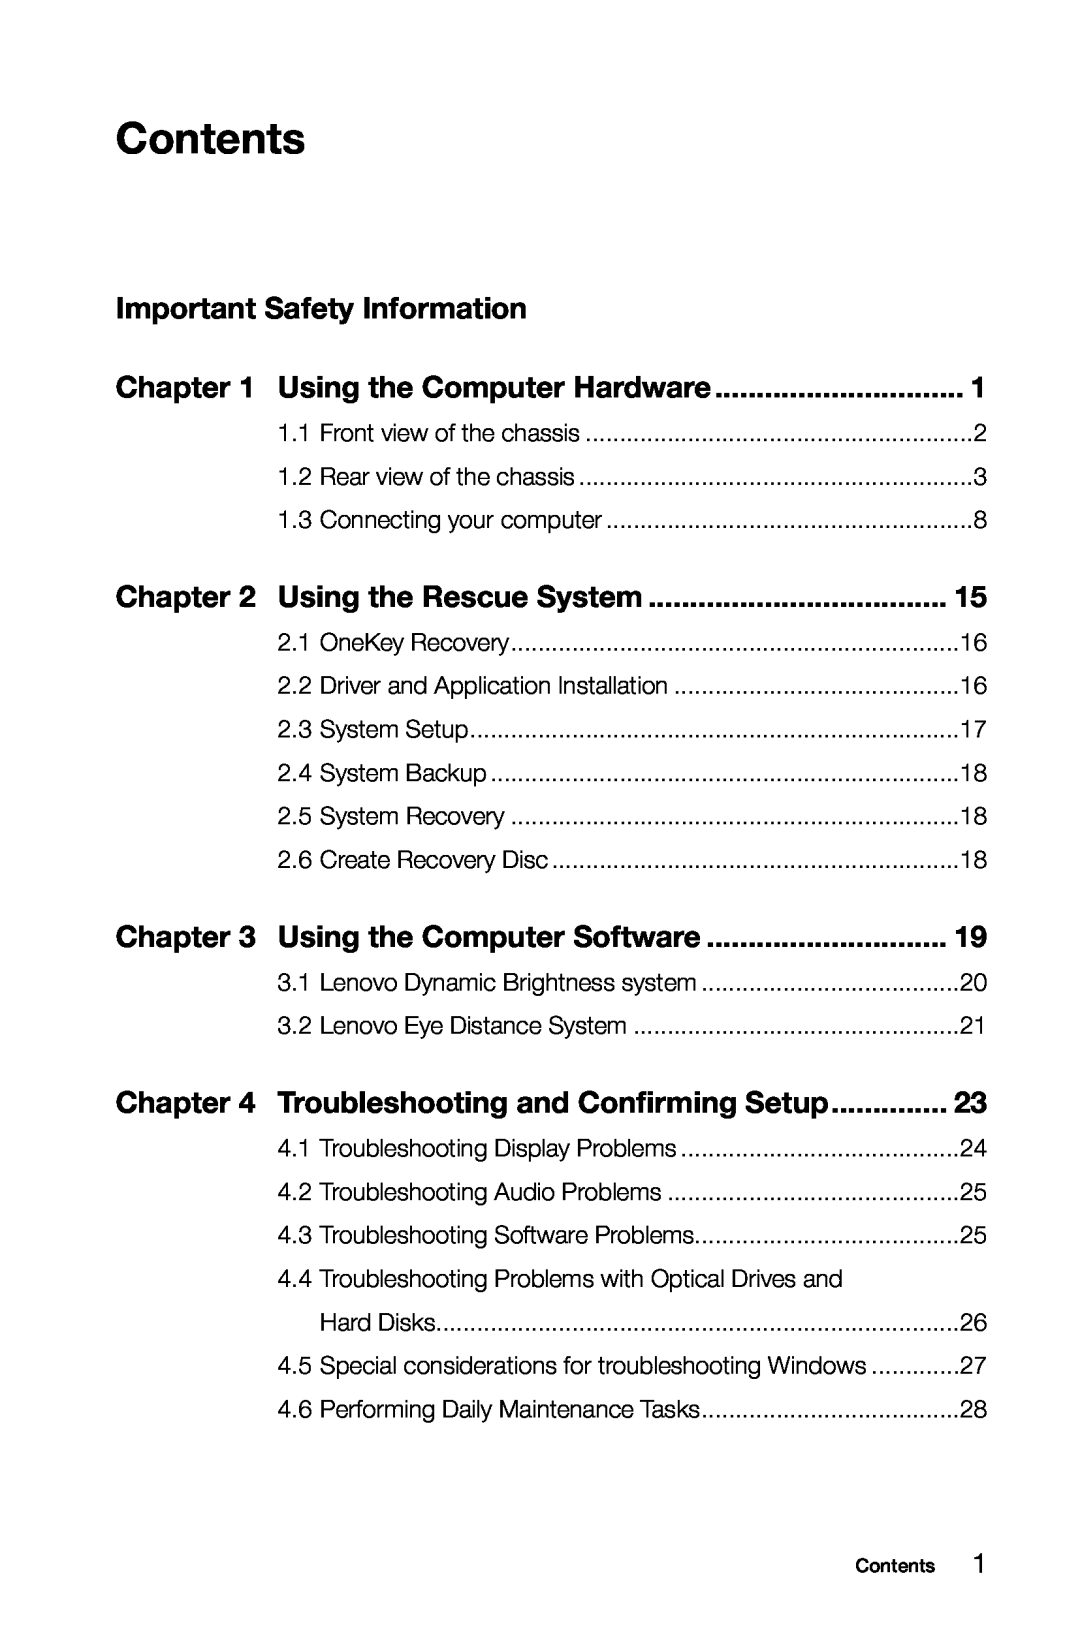 Lenovo 10091/2558/1196 manual Contents, Important Safety Information, Using the Rescue System, Using the Computer Software 